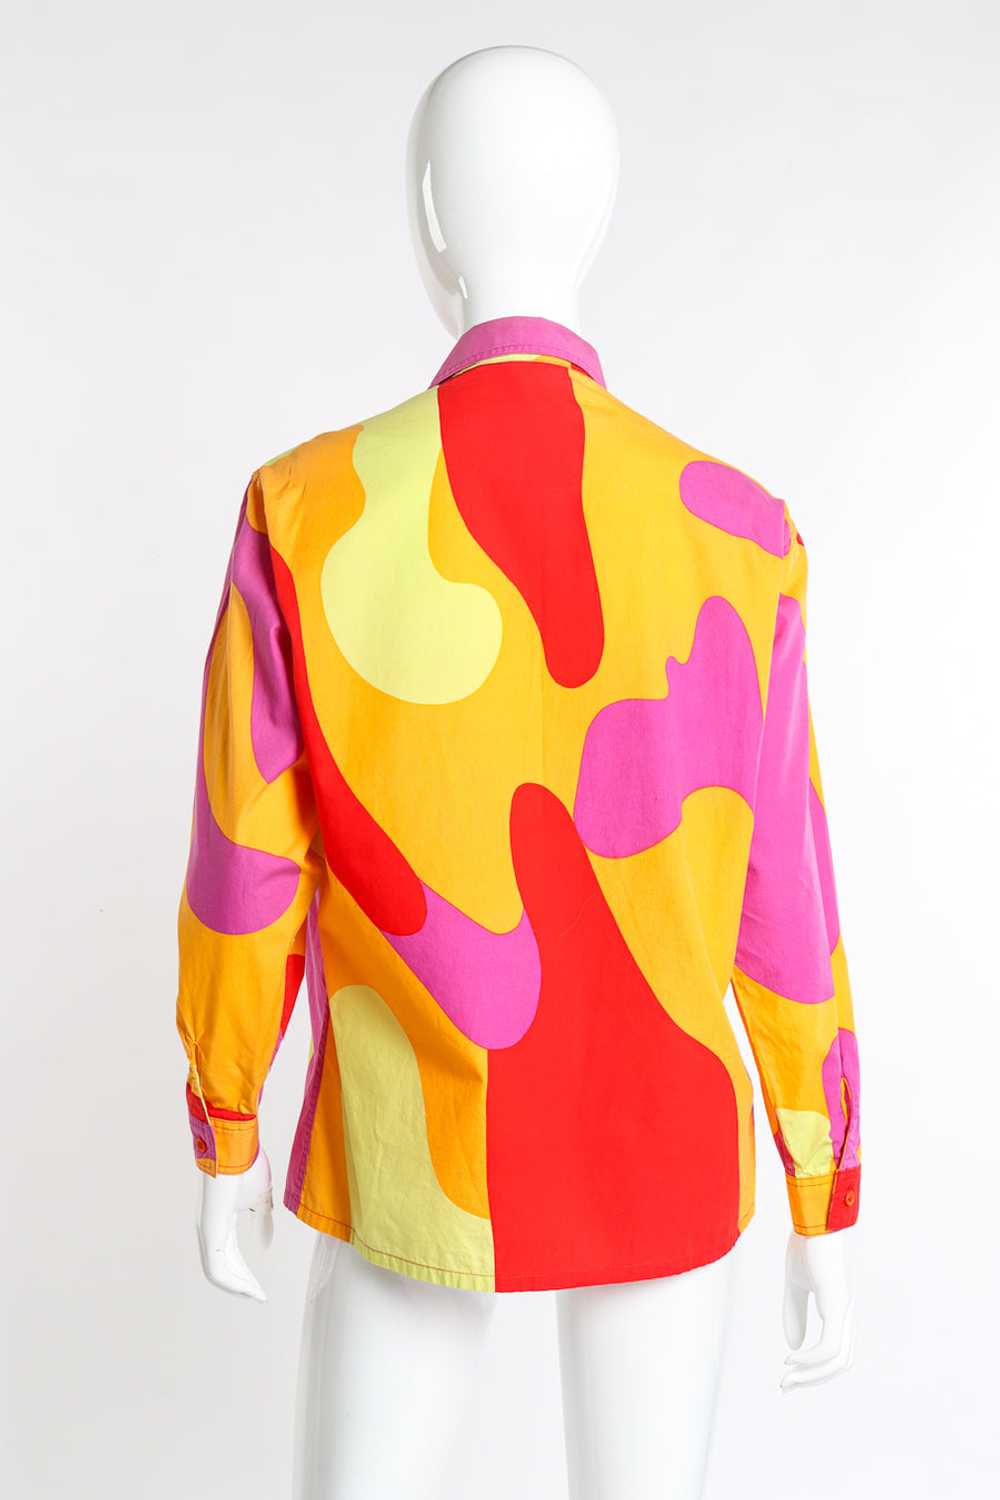 STEPHEN SPROUSE Andy Warhol Camouflage Button Up - image 3